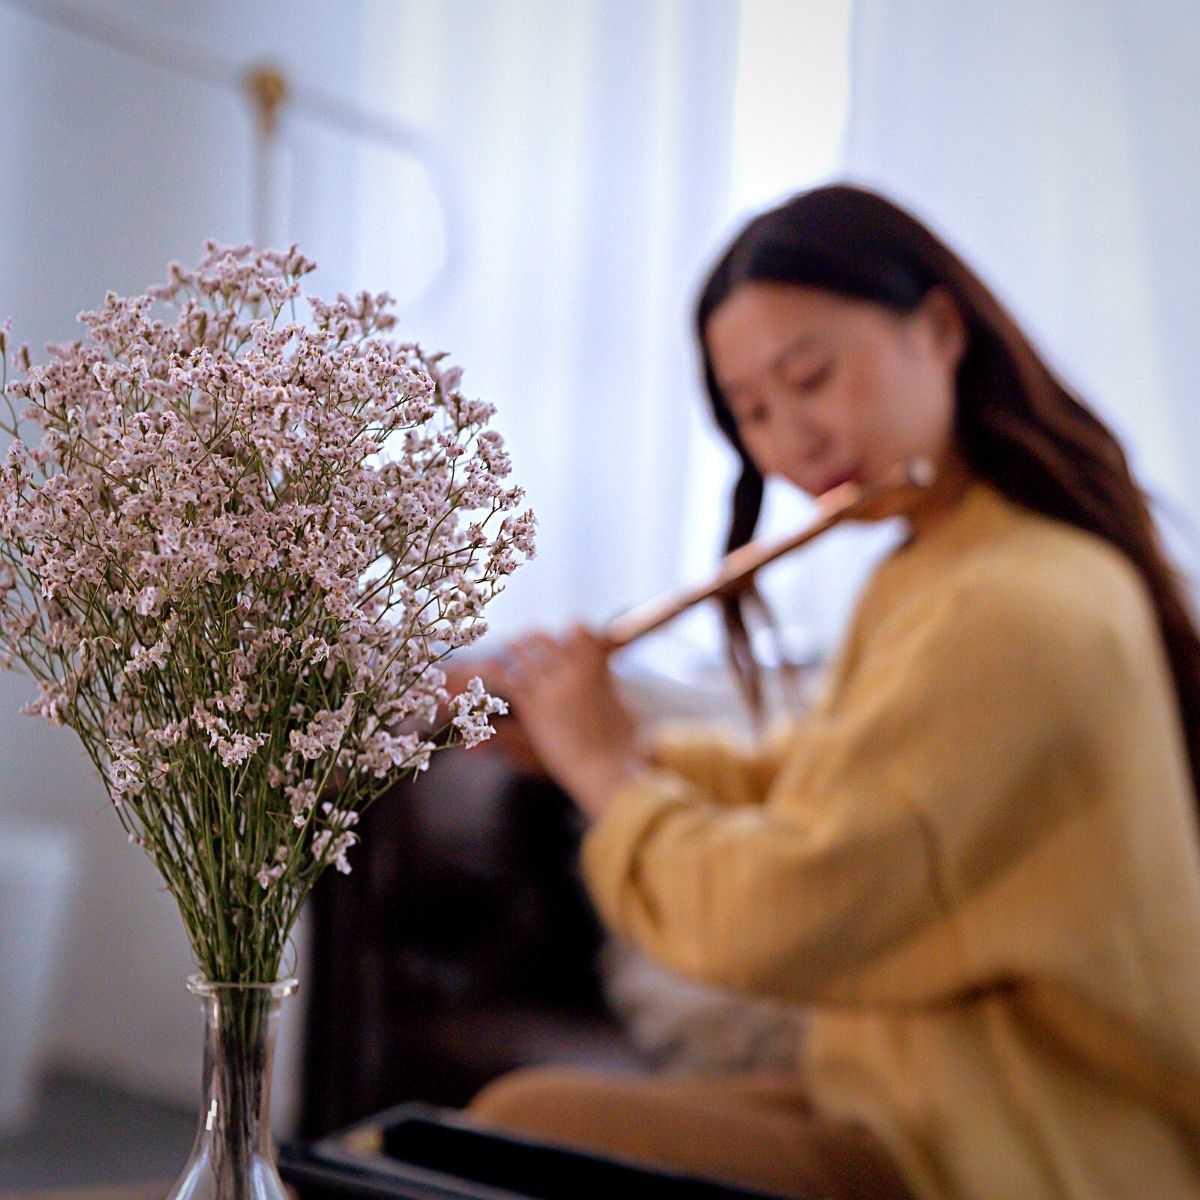 playing classical music for floral arrangements